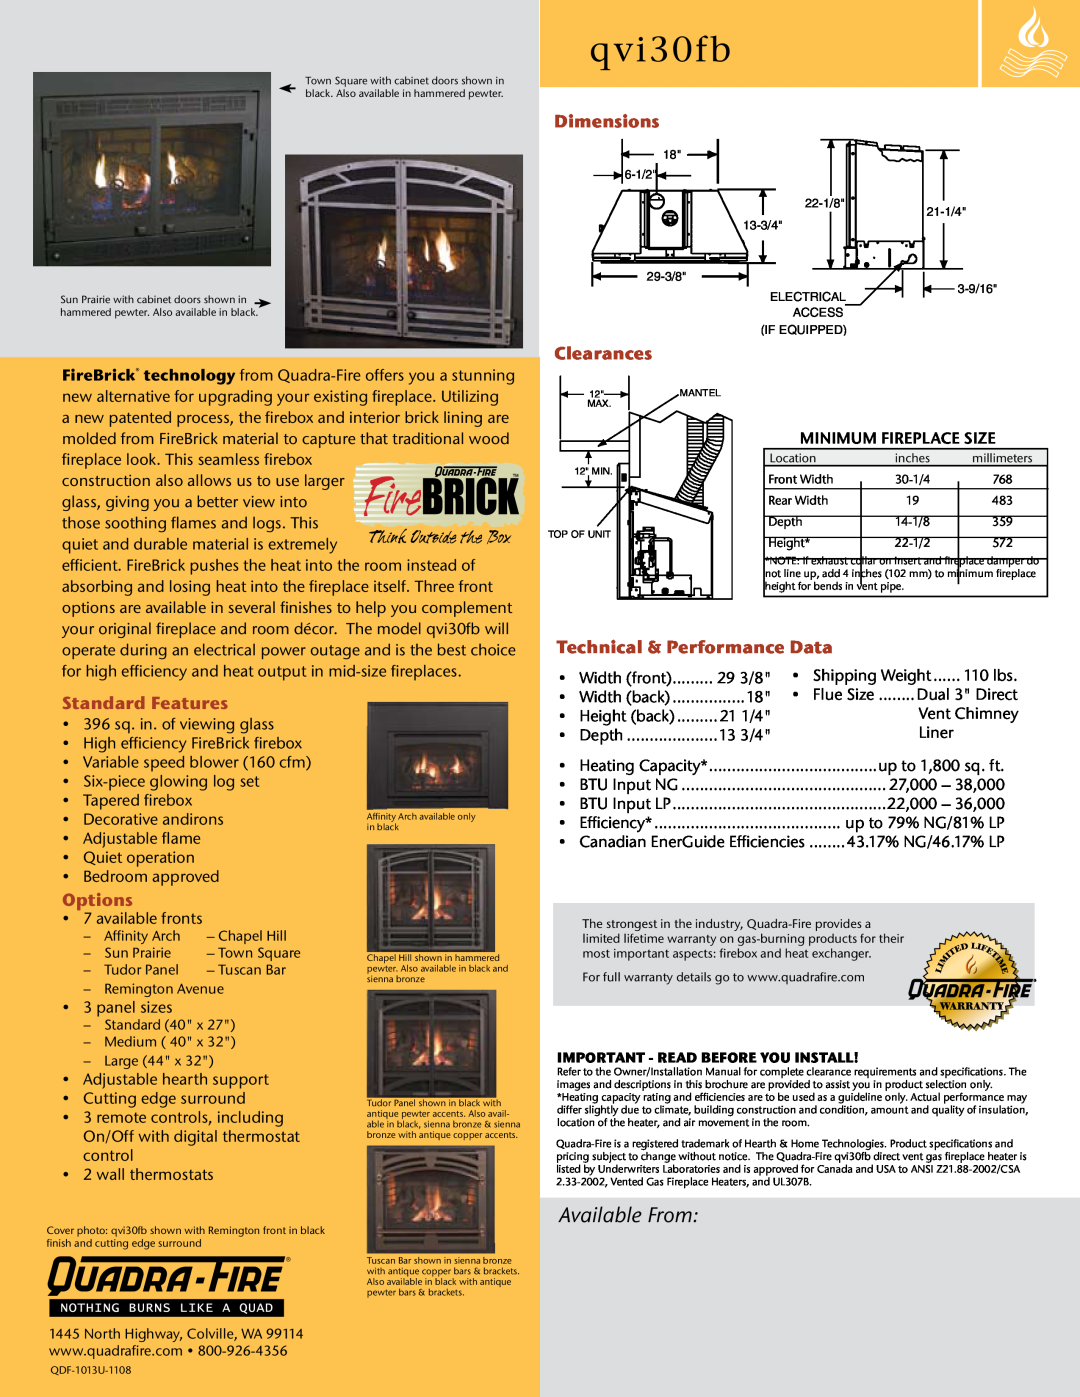 Hearth and Home Technologies Qvi30fb manual qvi30fb, Available From, Dimensions, Clearances, Technical & Performance Data 